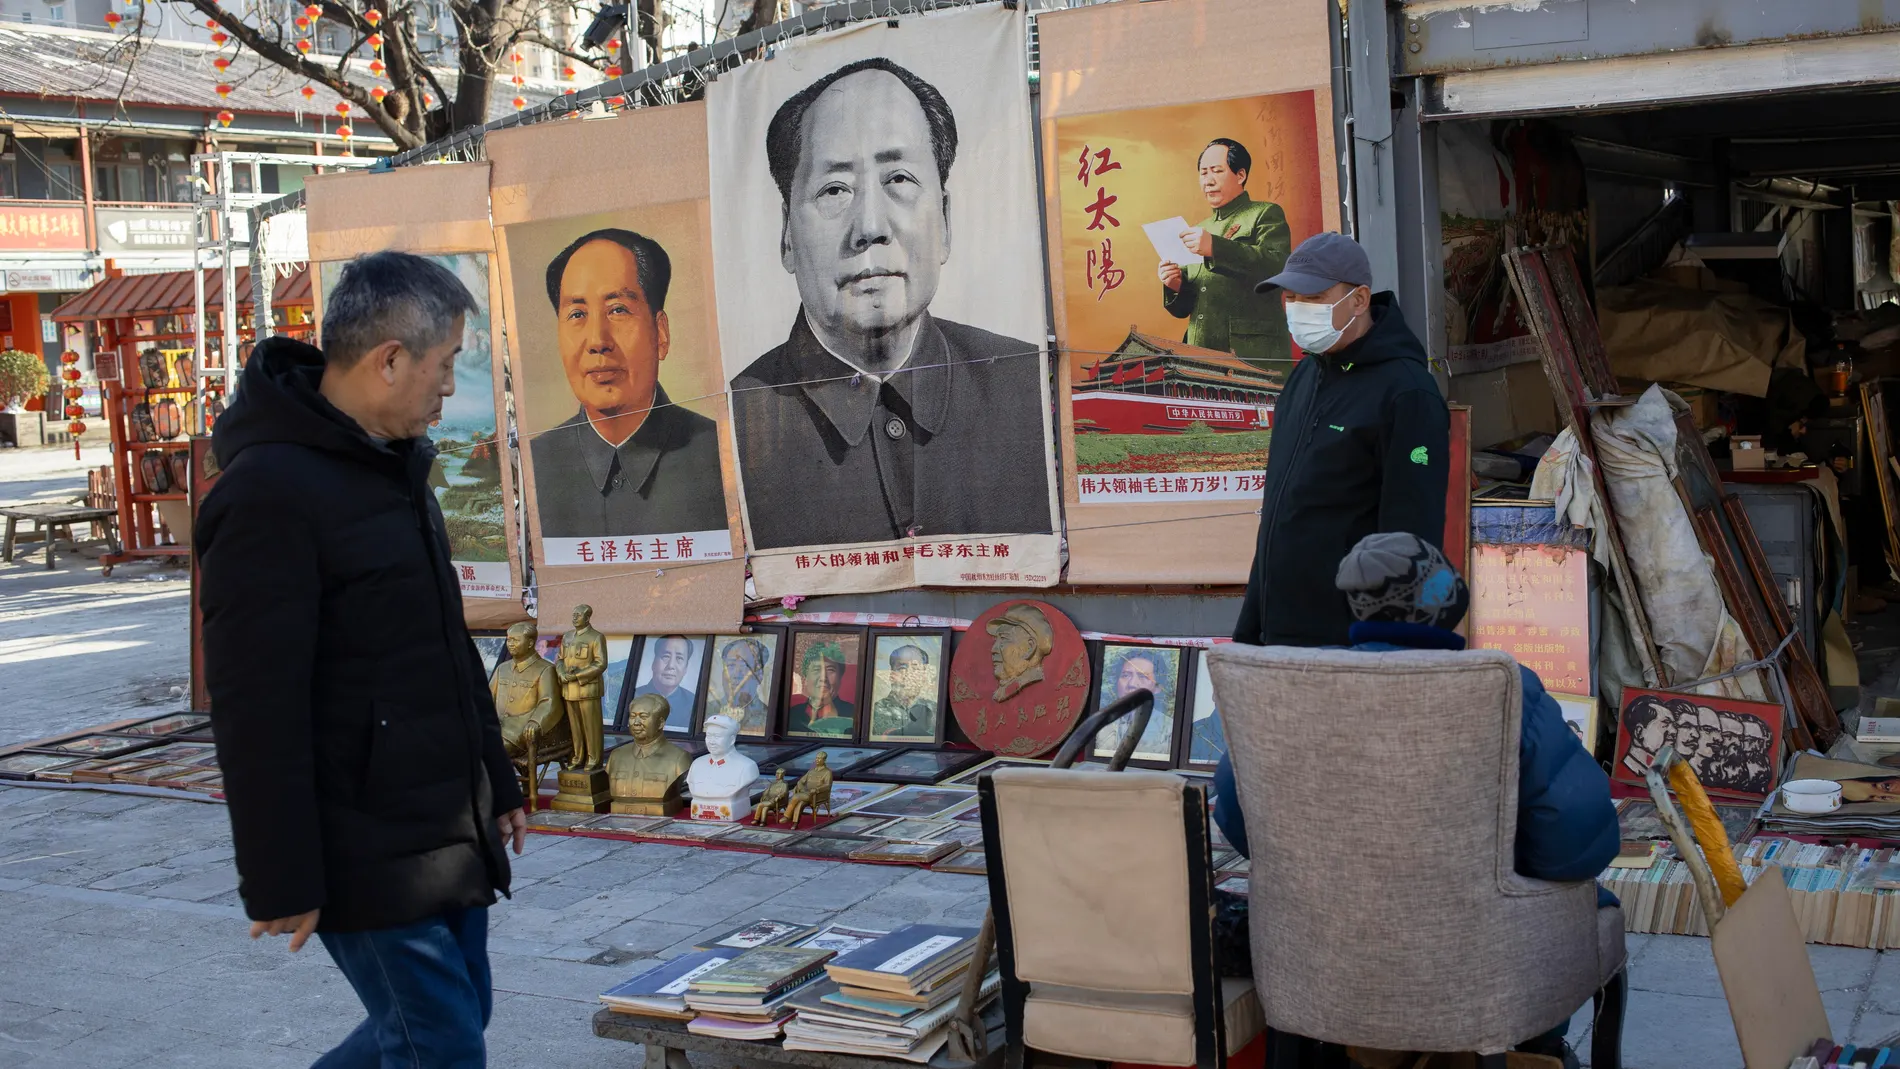 Beijing (China), 26/12/2023.- A man walks pass a stand selling merchandise depicting Mao Zedong at a market in Beijing, China, 26 December 2023. December 26, 2023 marks the 130 anniversary of the birth of former Chinese leader Mao Zedong. EFE/EPA/ANDRES MARTINEZ CASARES 